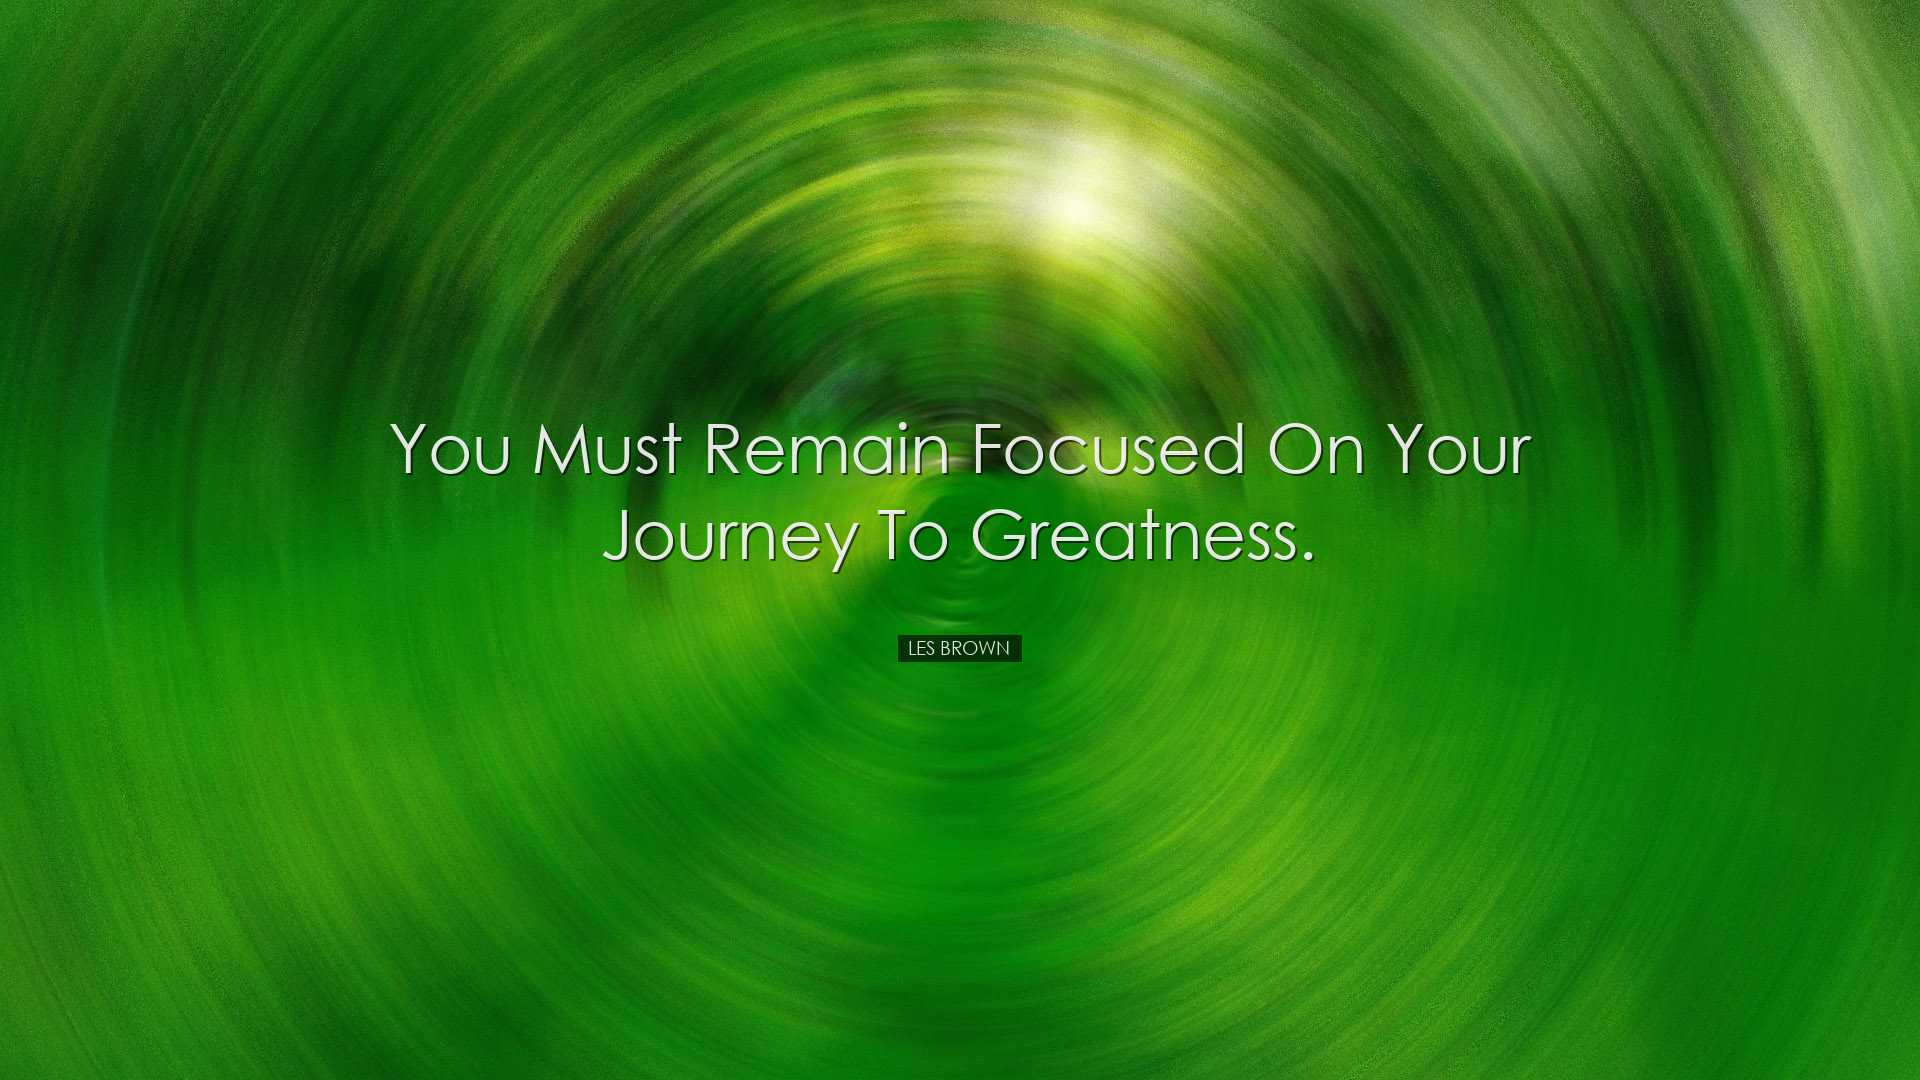 You must remain focused on your journey to greatness. - Les Brown